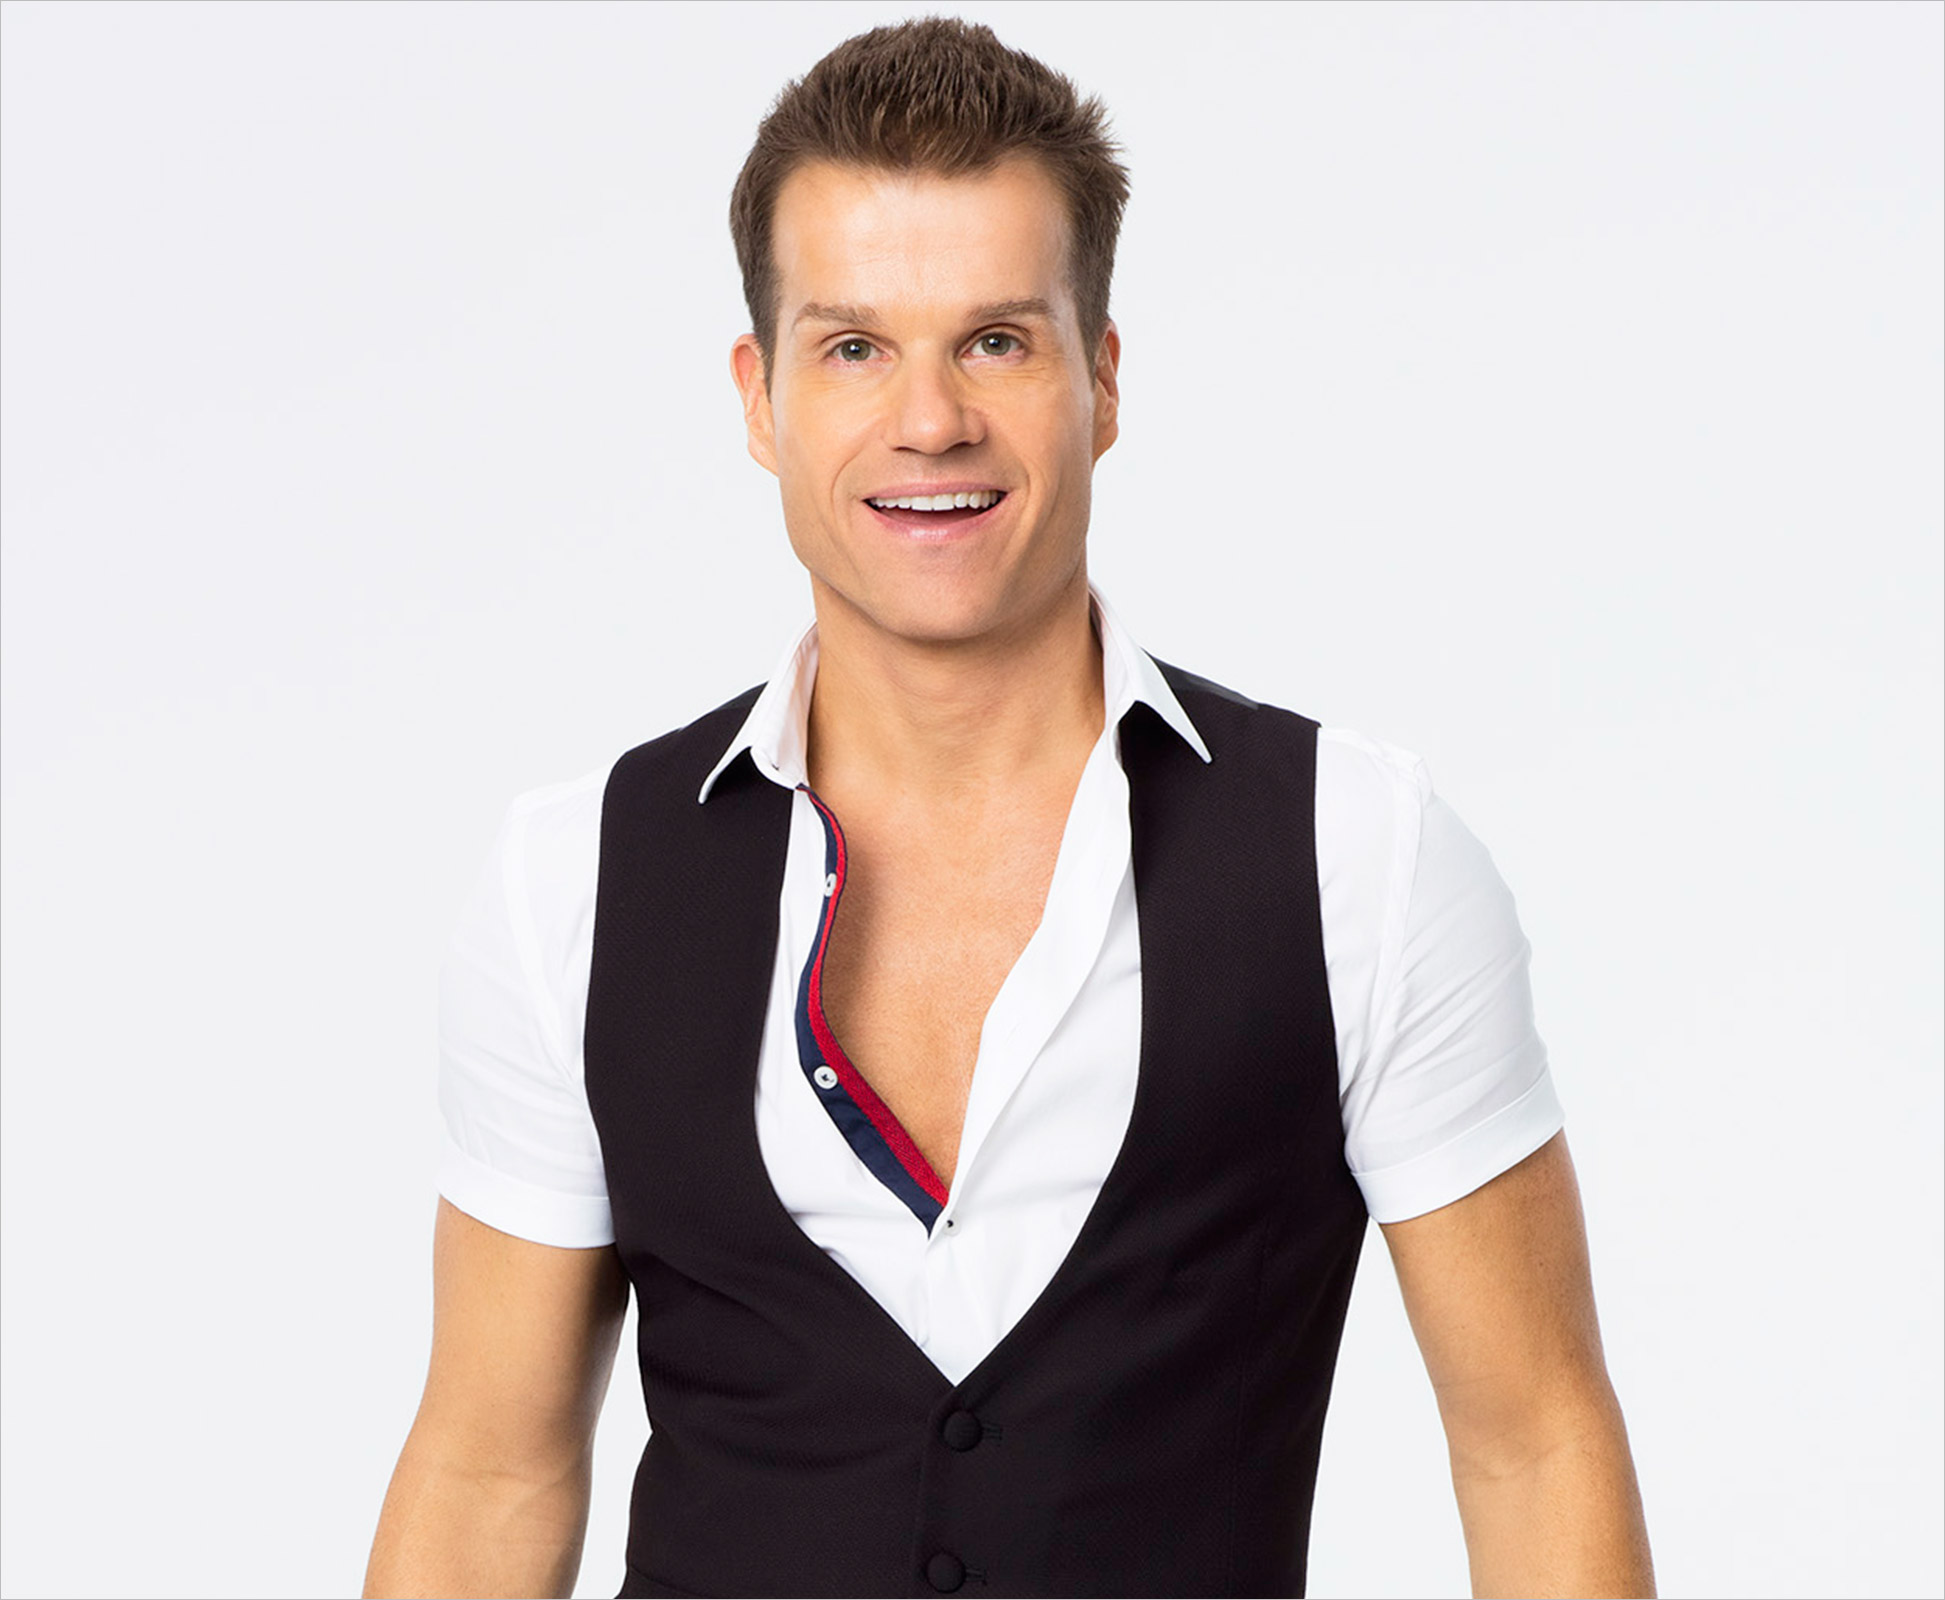 DWTS Pro Louis van Amstel: 25 Things You Don't Know About Me